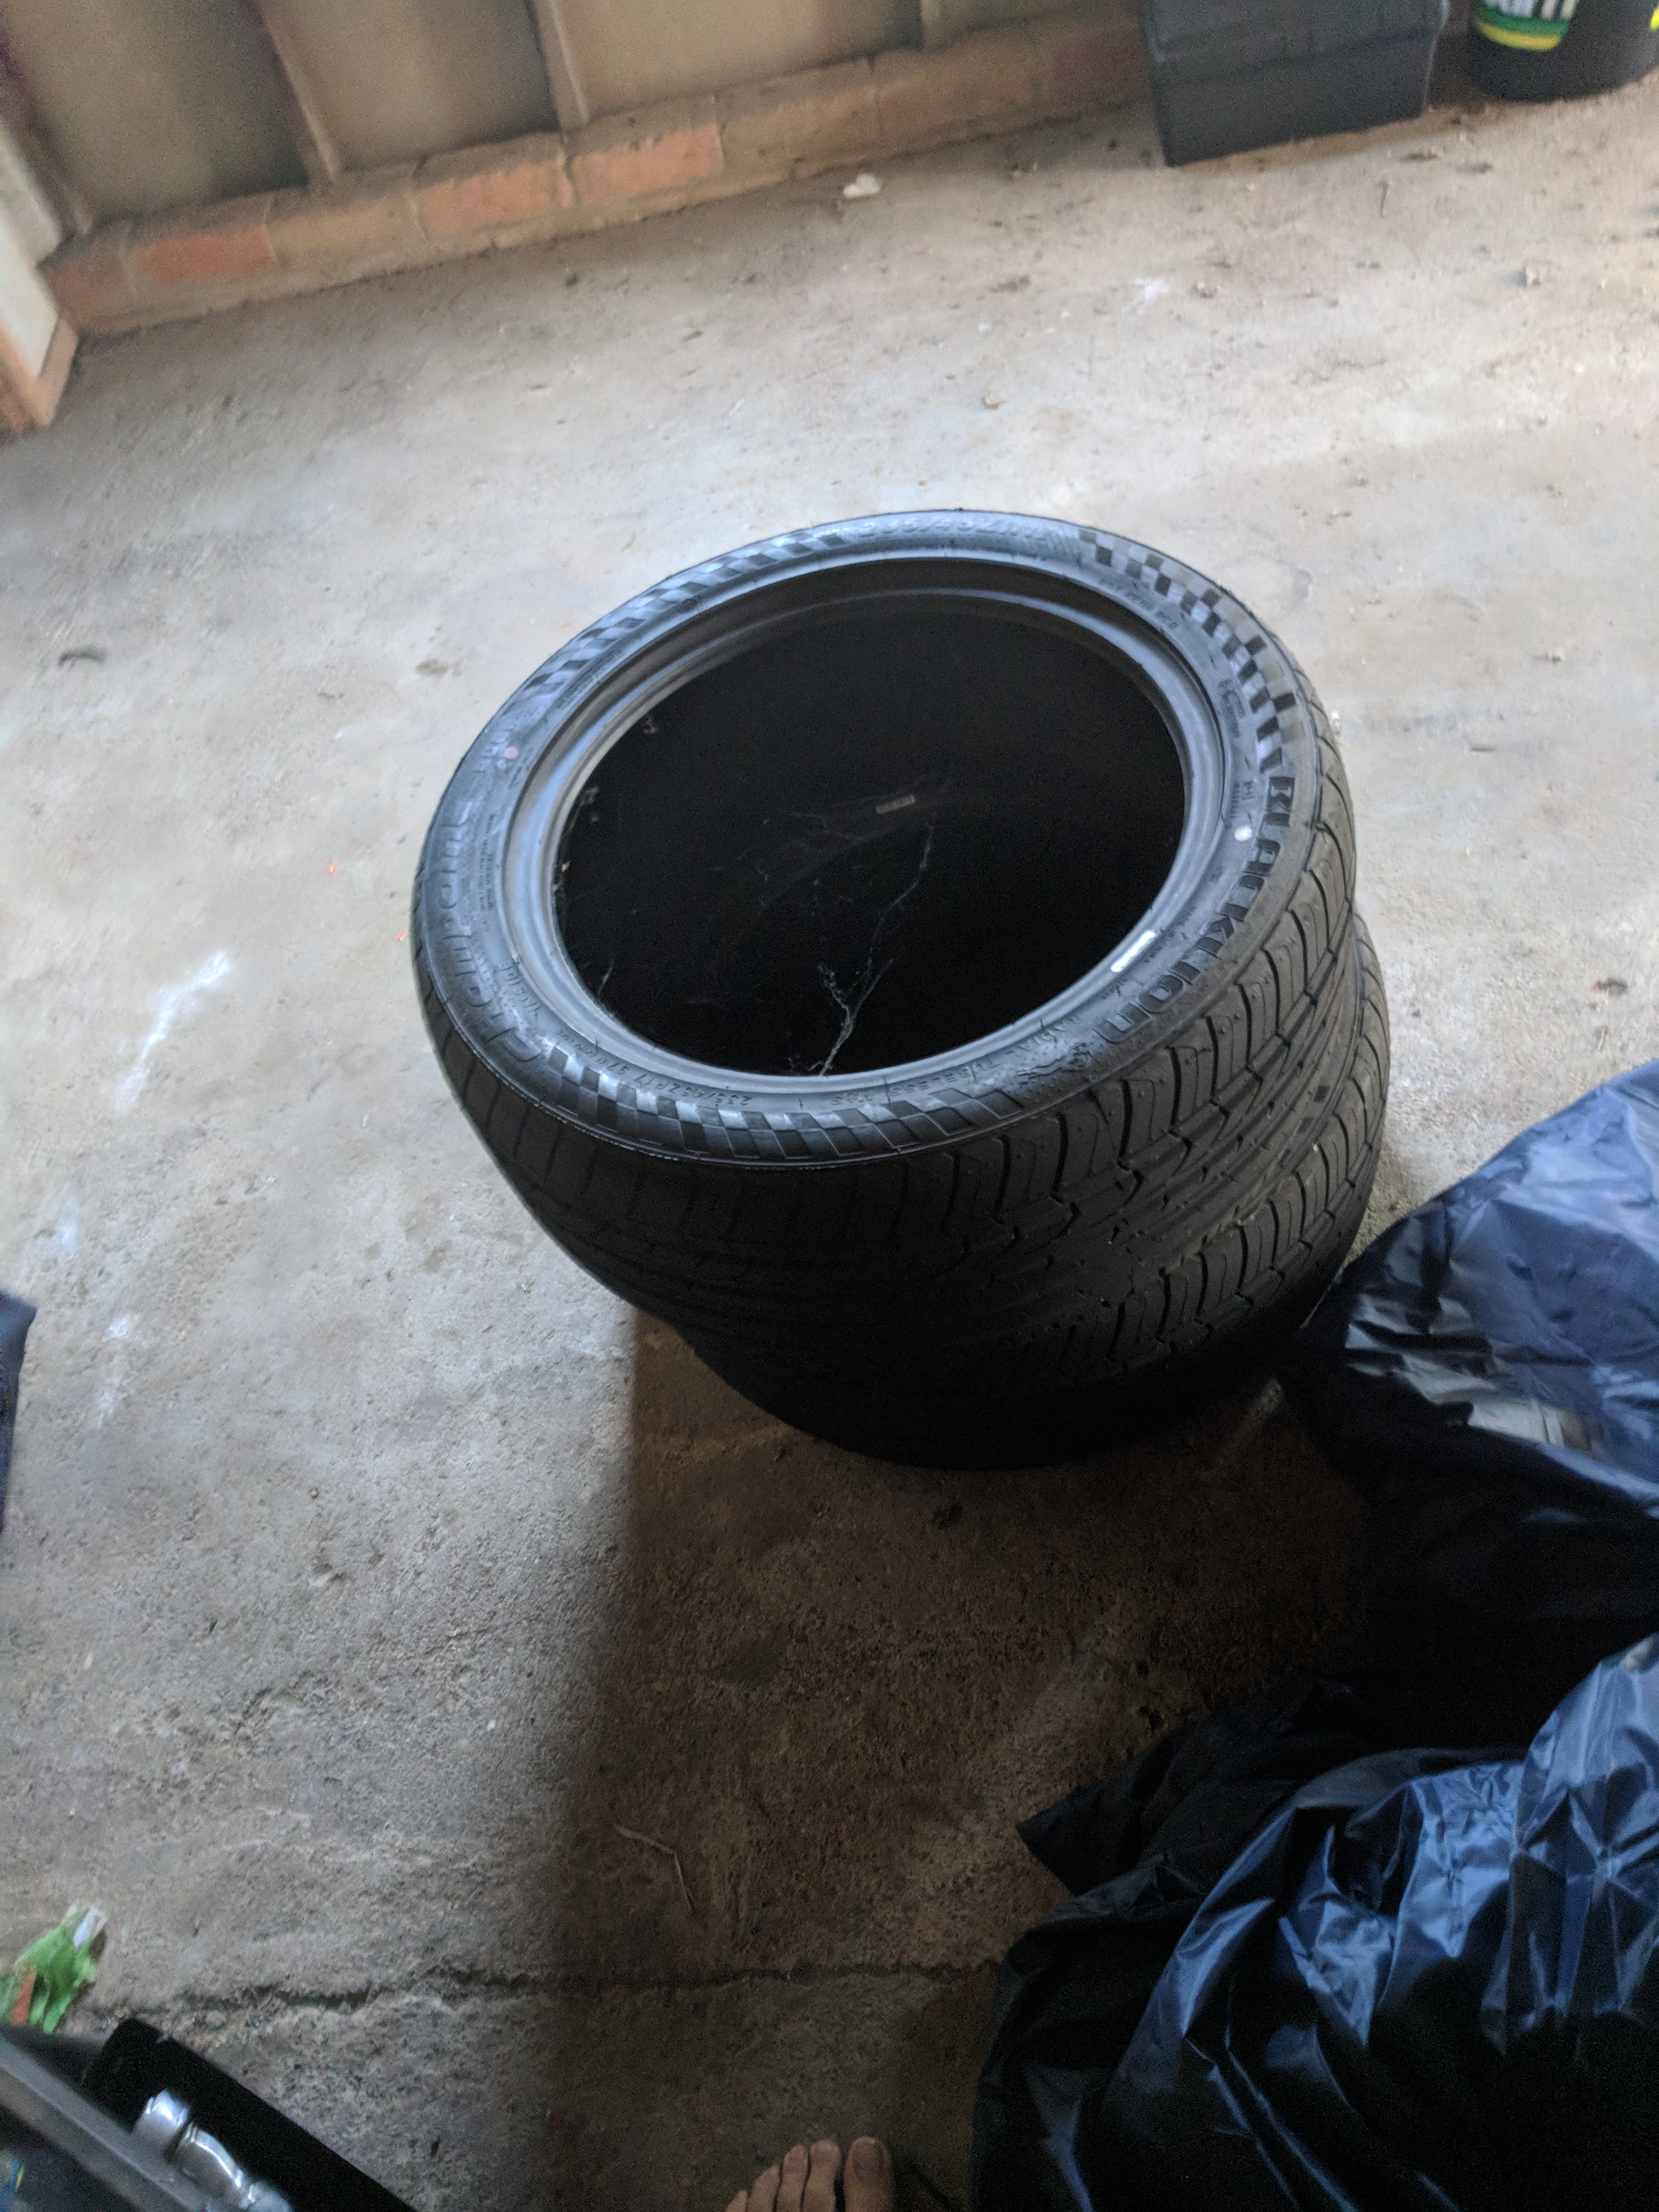 VY SV8 Rims and Tyres